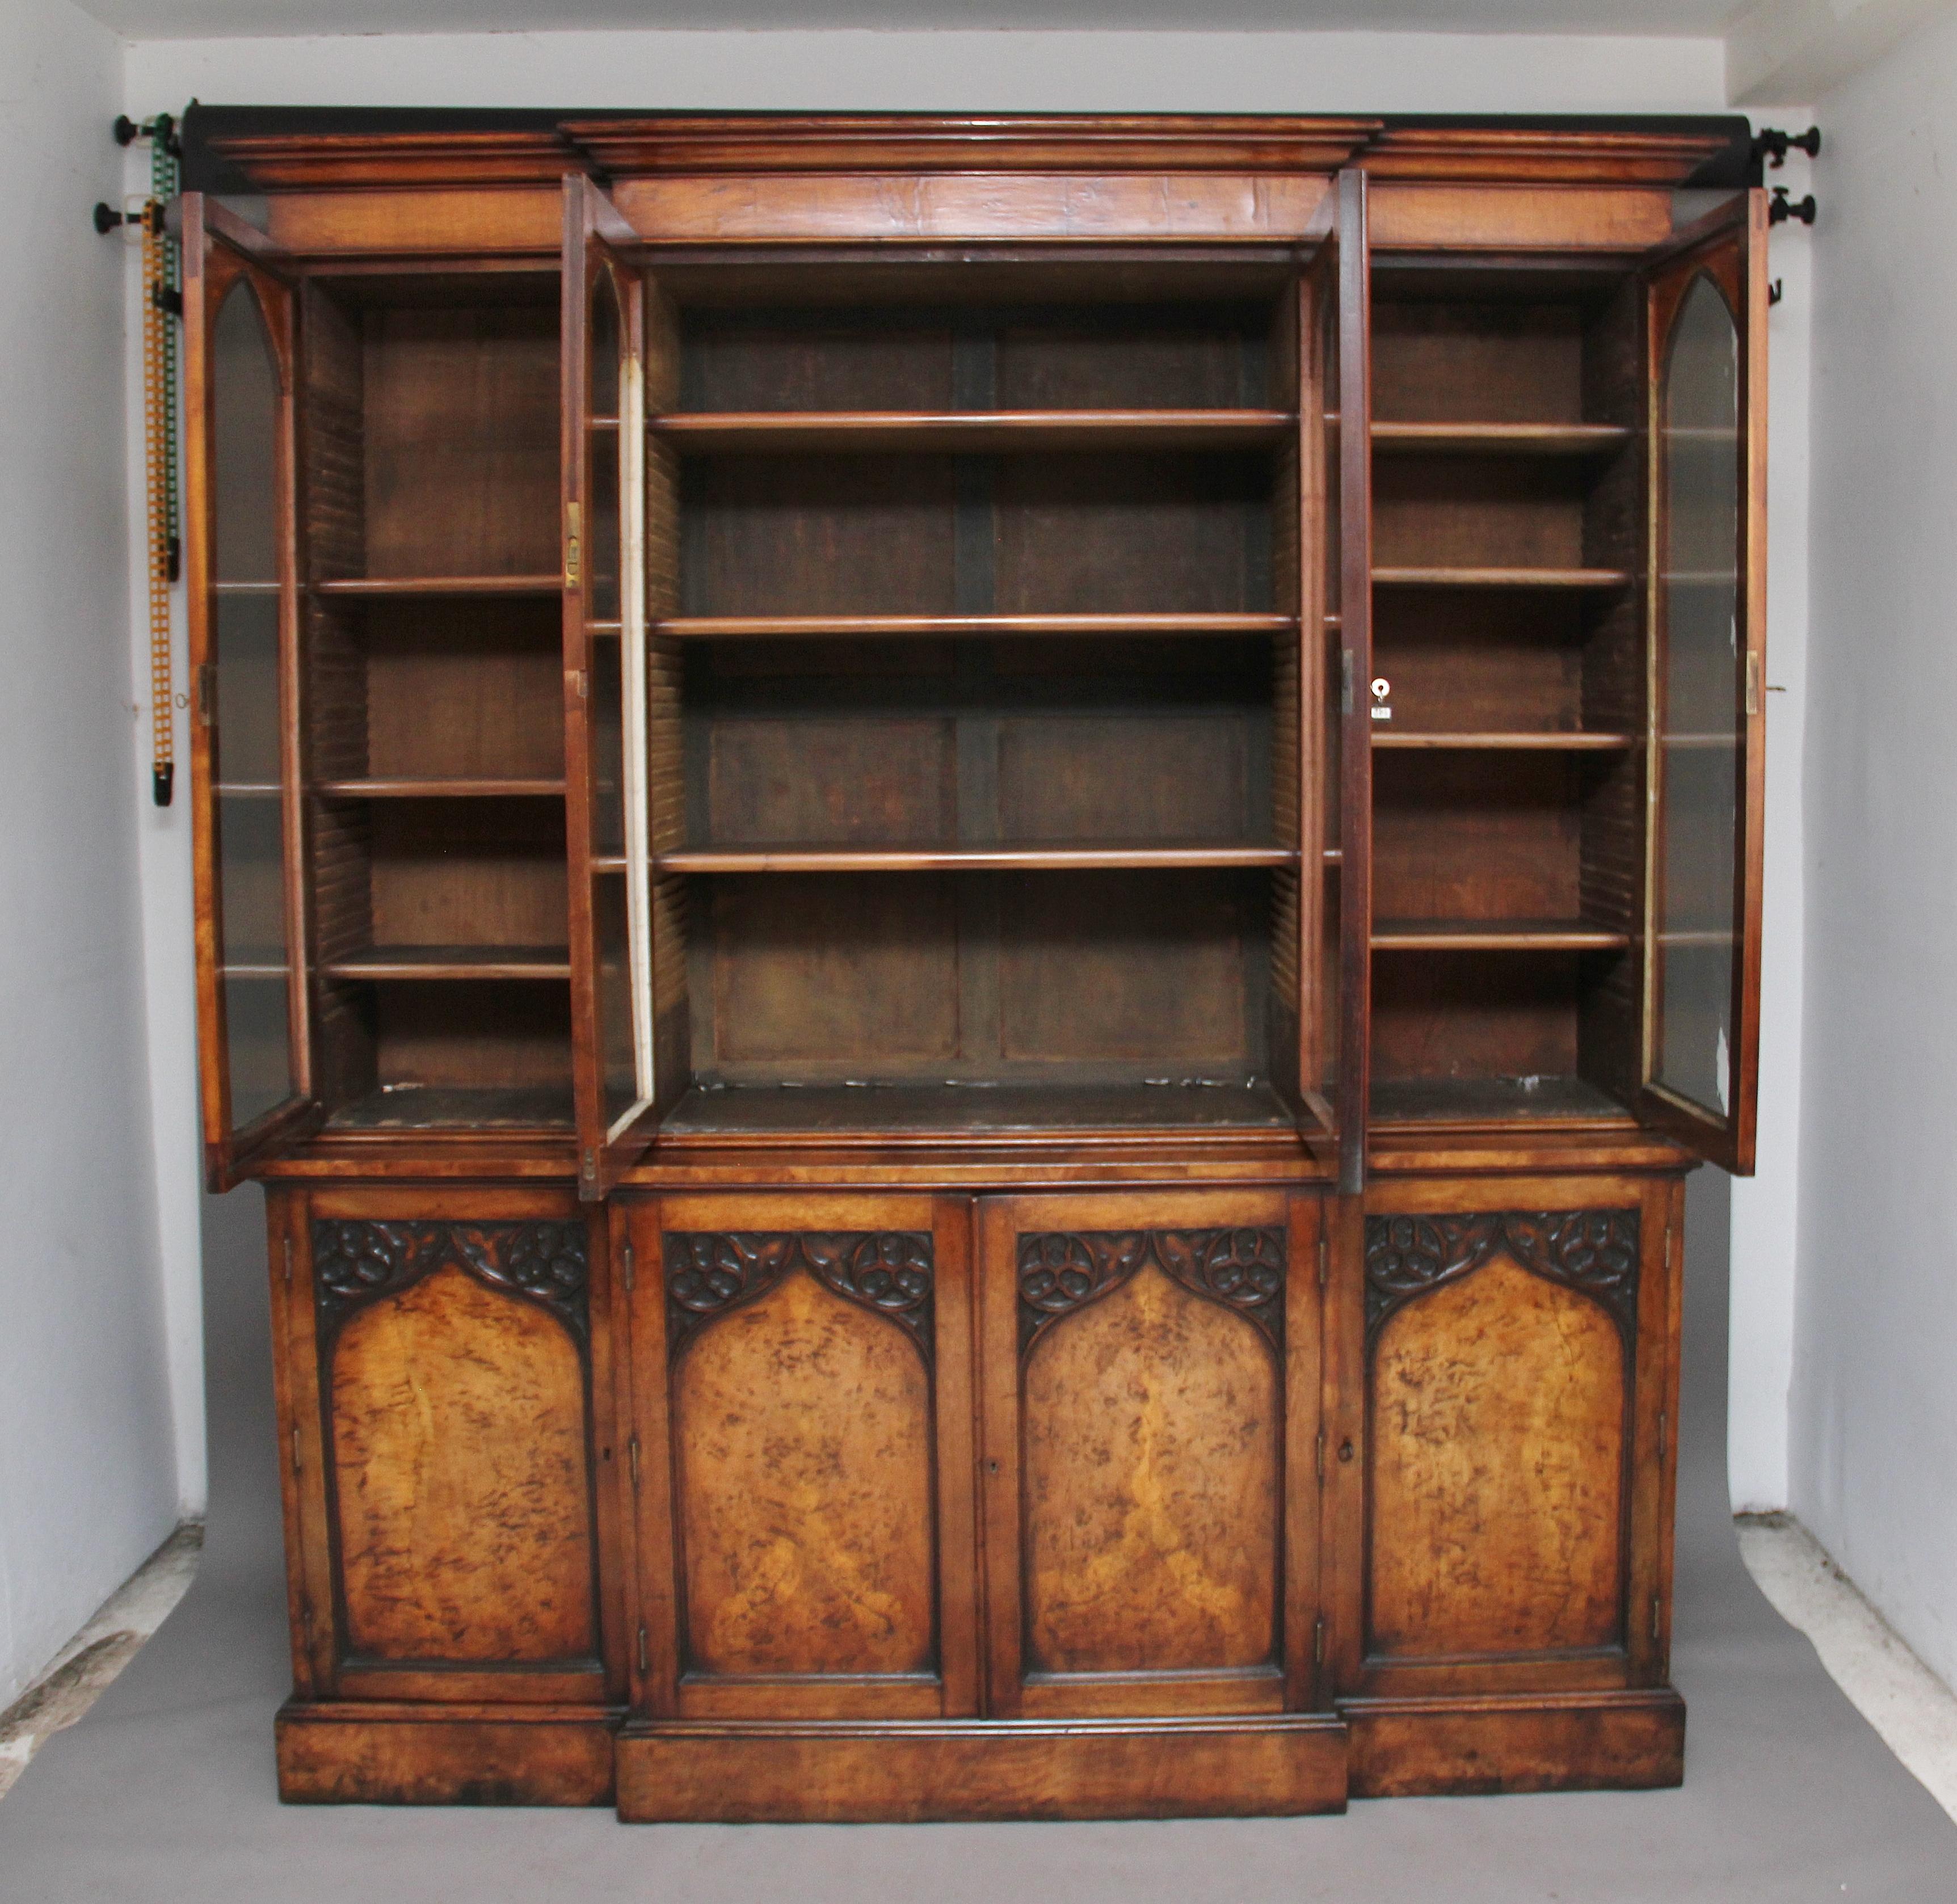 A fabulous early 19th century pollard oak and walnut breakfront bookcase in the Gothic revival style, the stepped moulded cornice above four large glazed doors with Gothic arched frames with carved leaf decoration in the corners, the doors opening